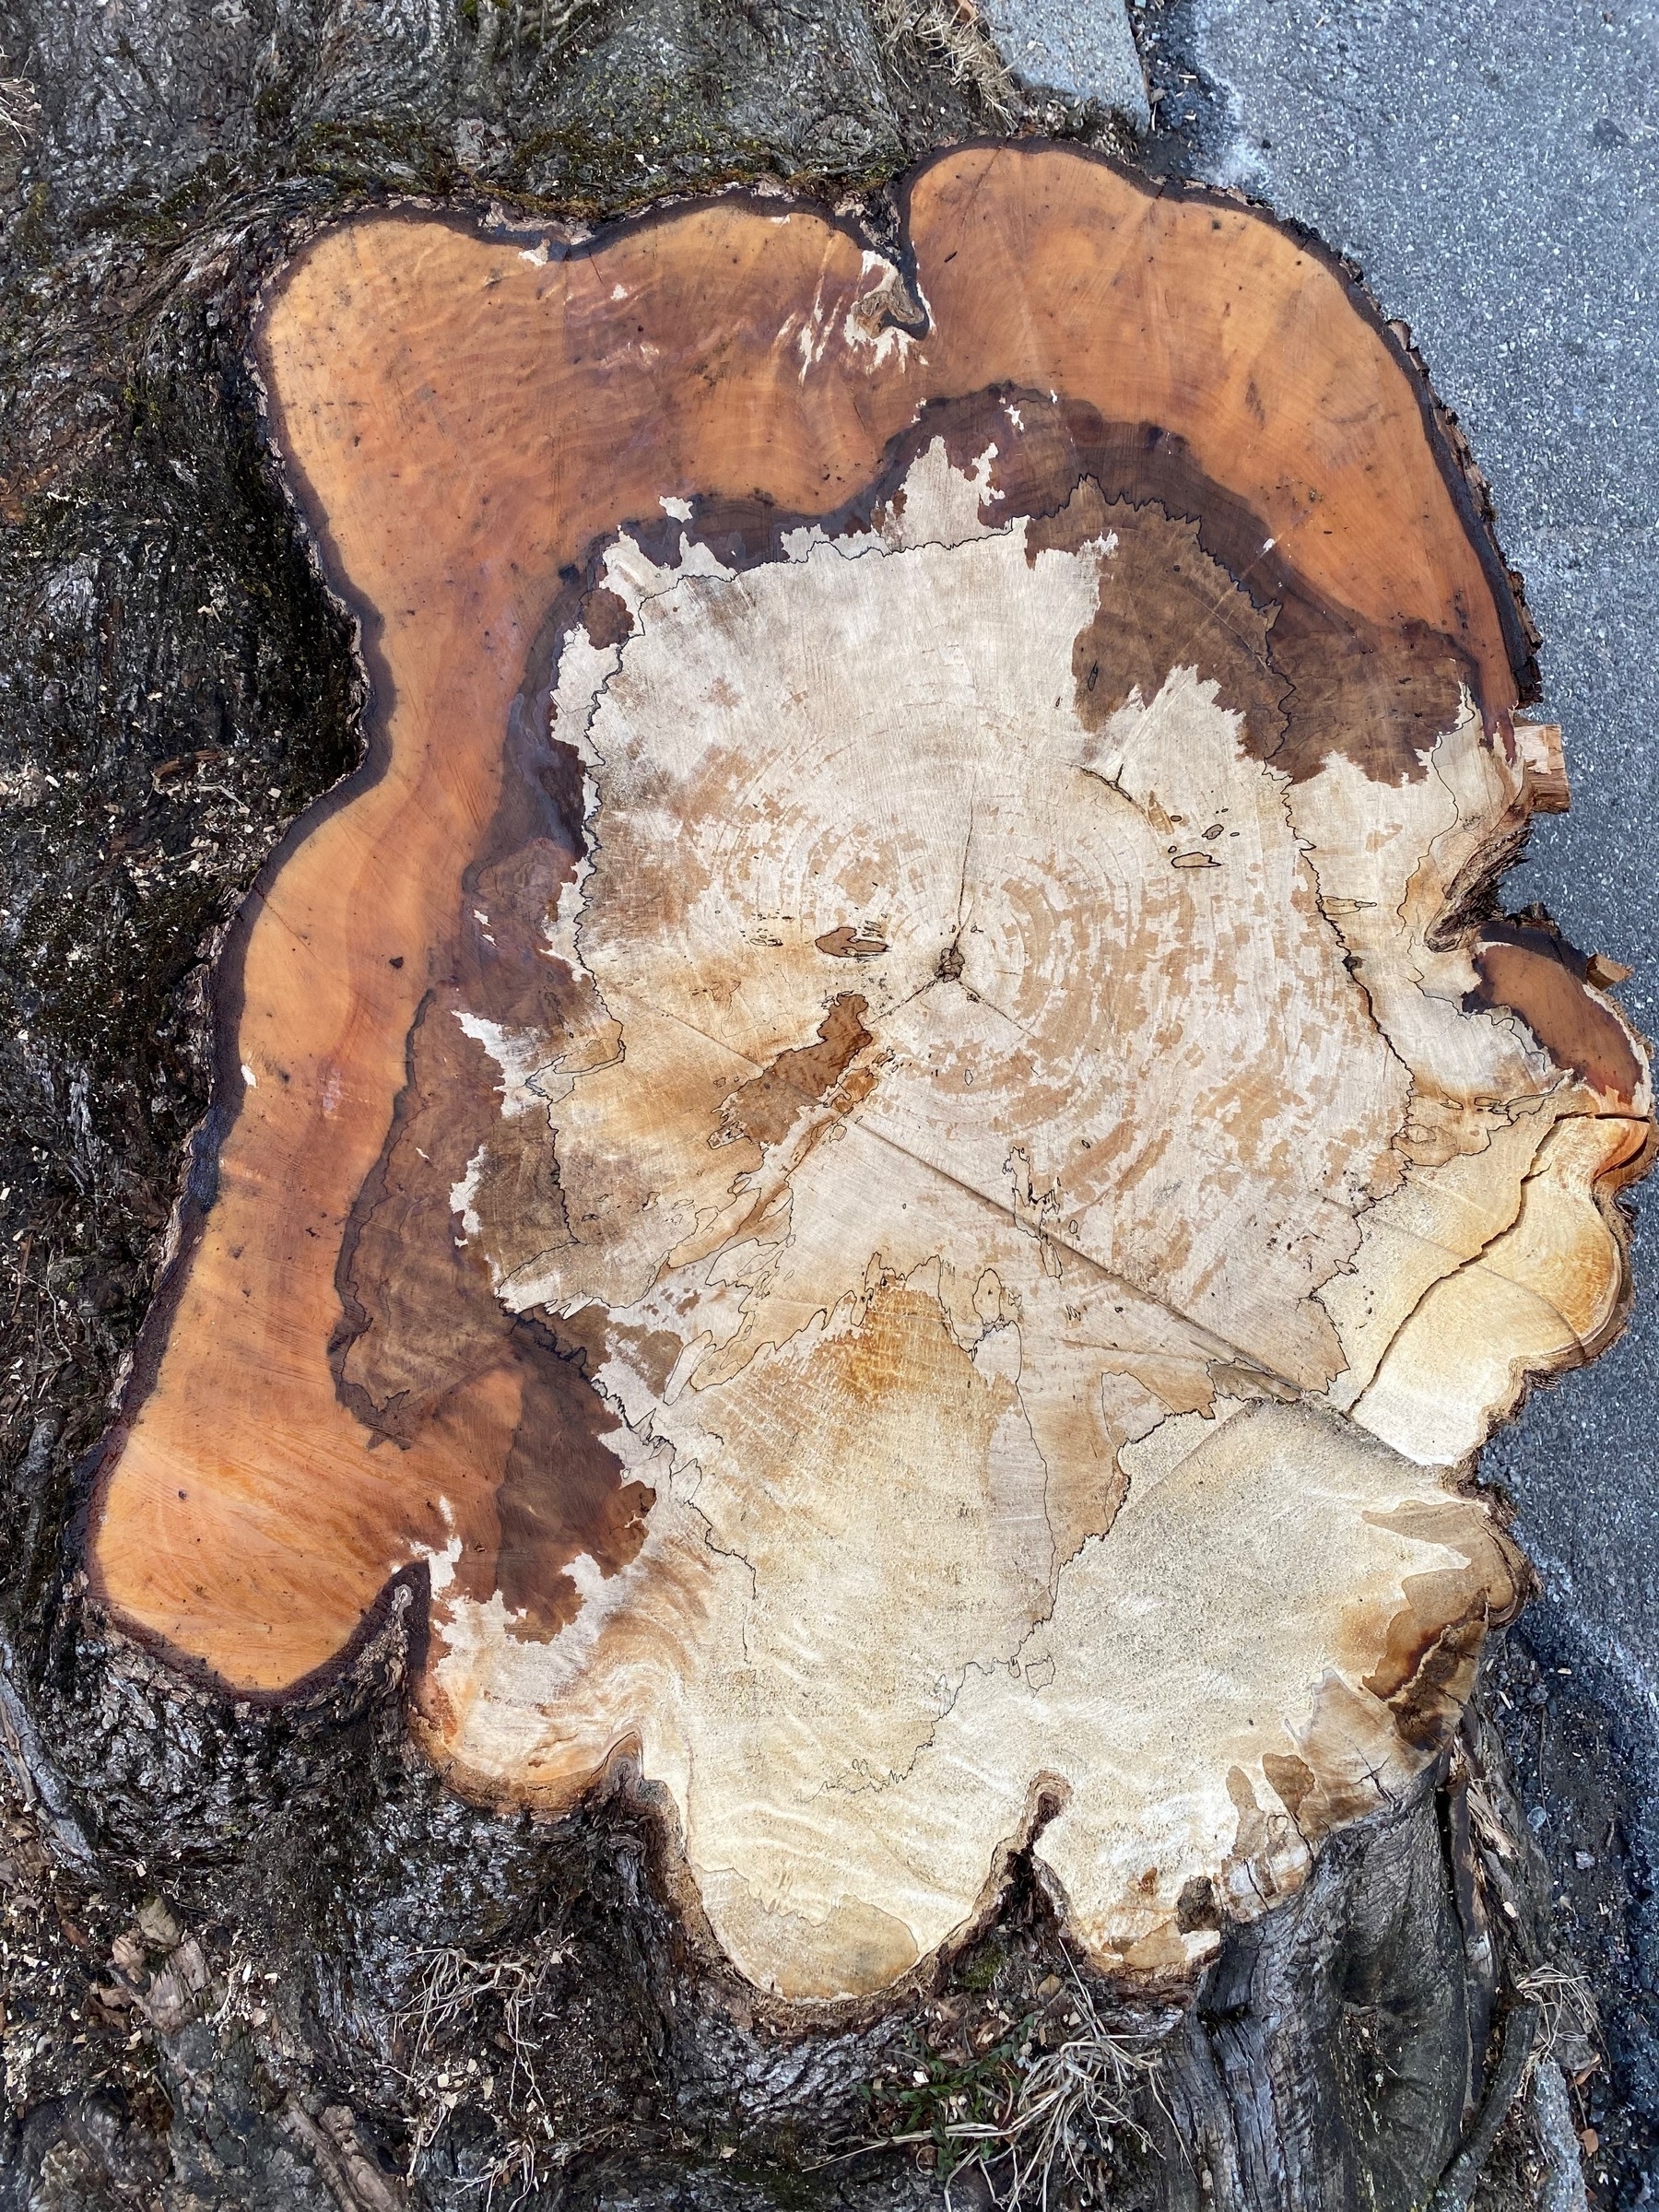 View of a tree stump with a clean cut from directly above.